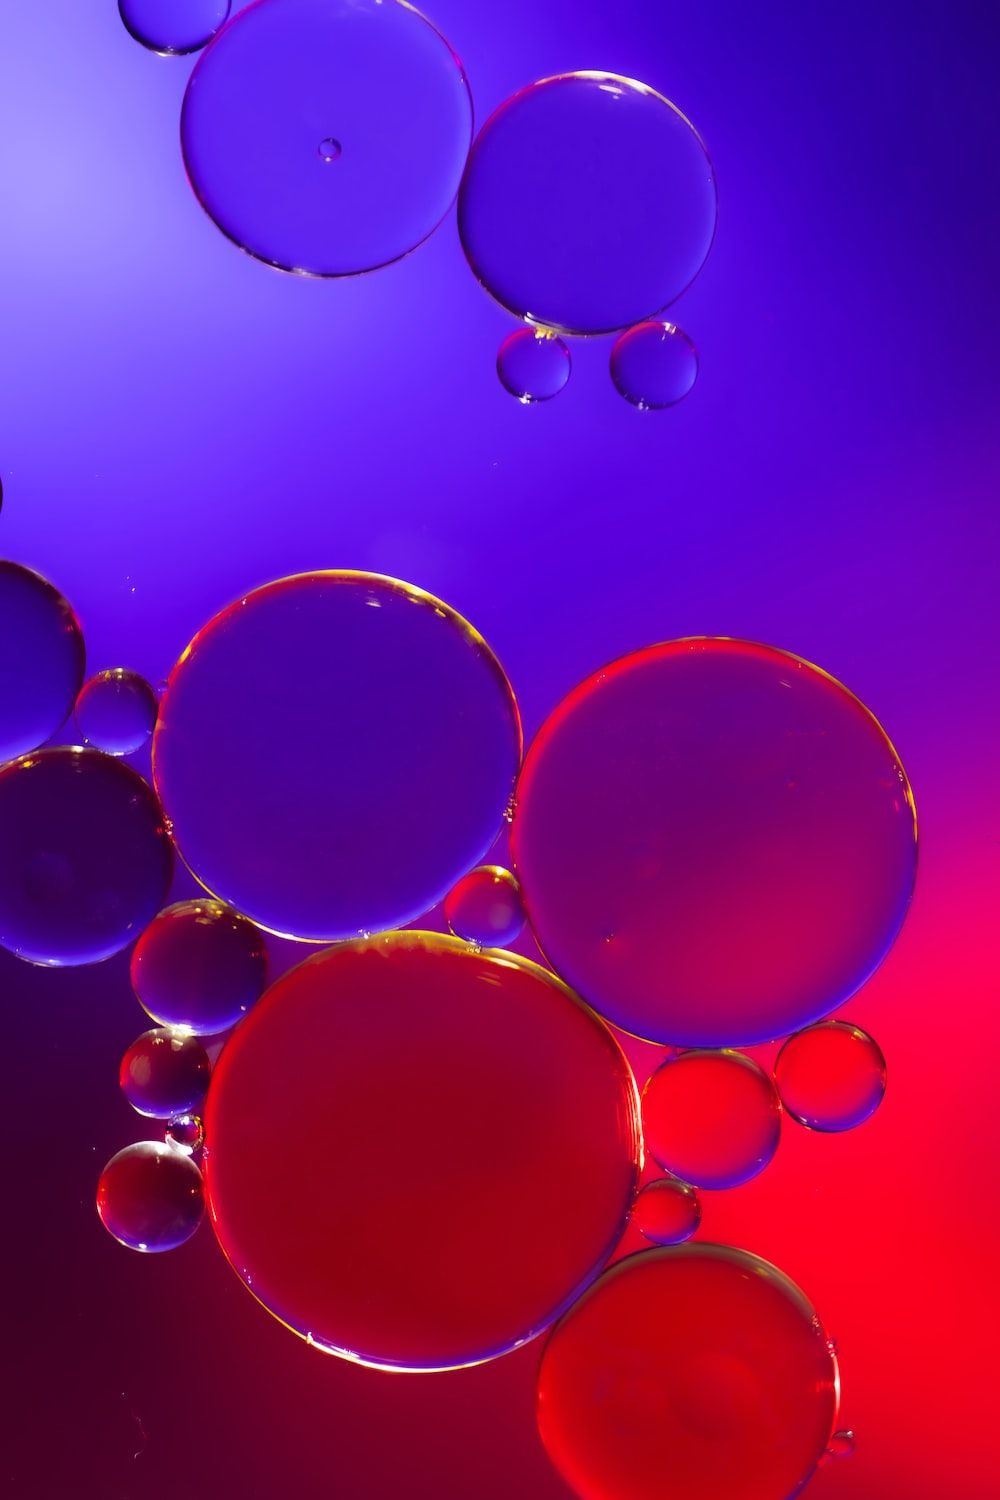 Oil bubbles in water with a red and blue background - Bubbles